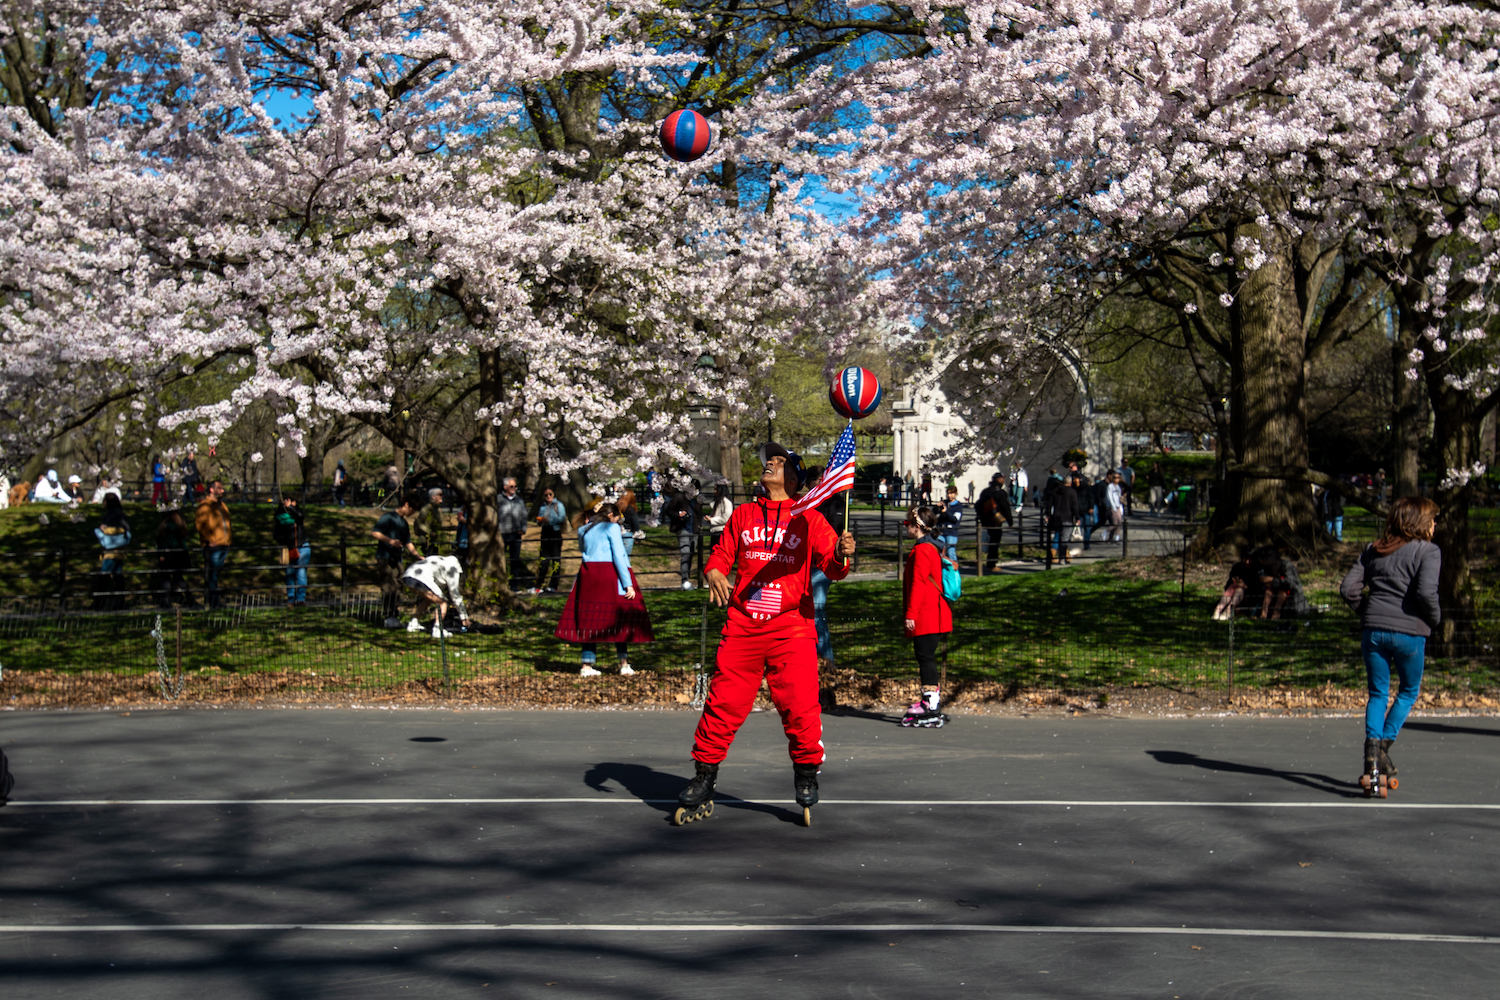 A person wearing an all-red sweatsuit with "Ricky Superstar" printed on the front spins a basketball on top of an American flag while throwing another ball in the air. The person is doing this while wearing inline skates.